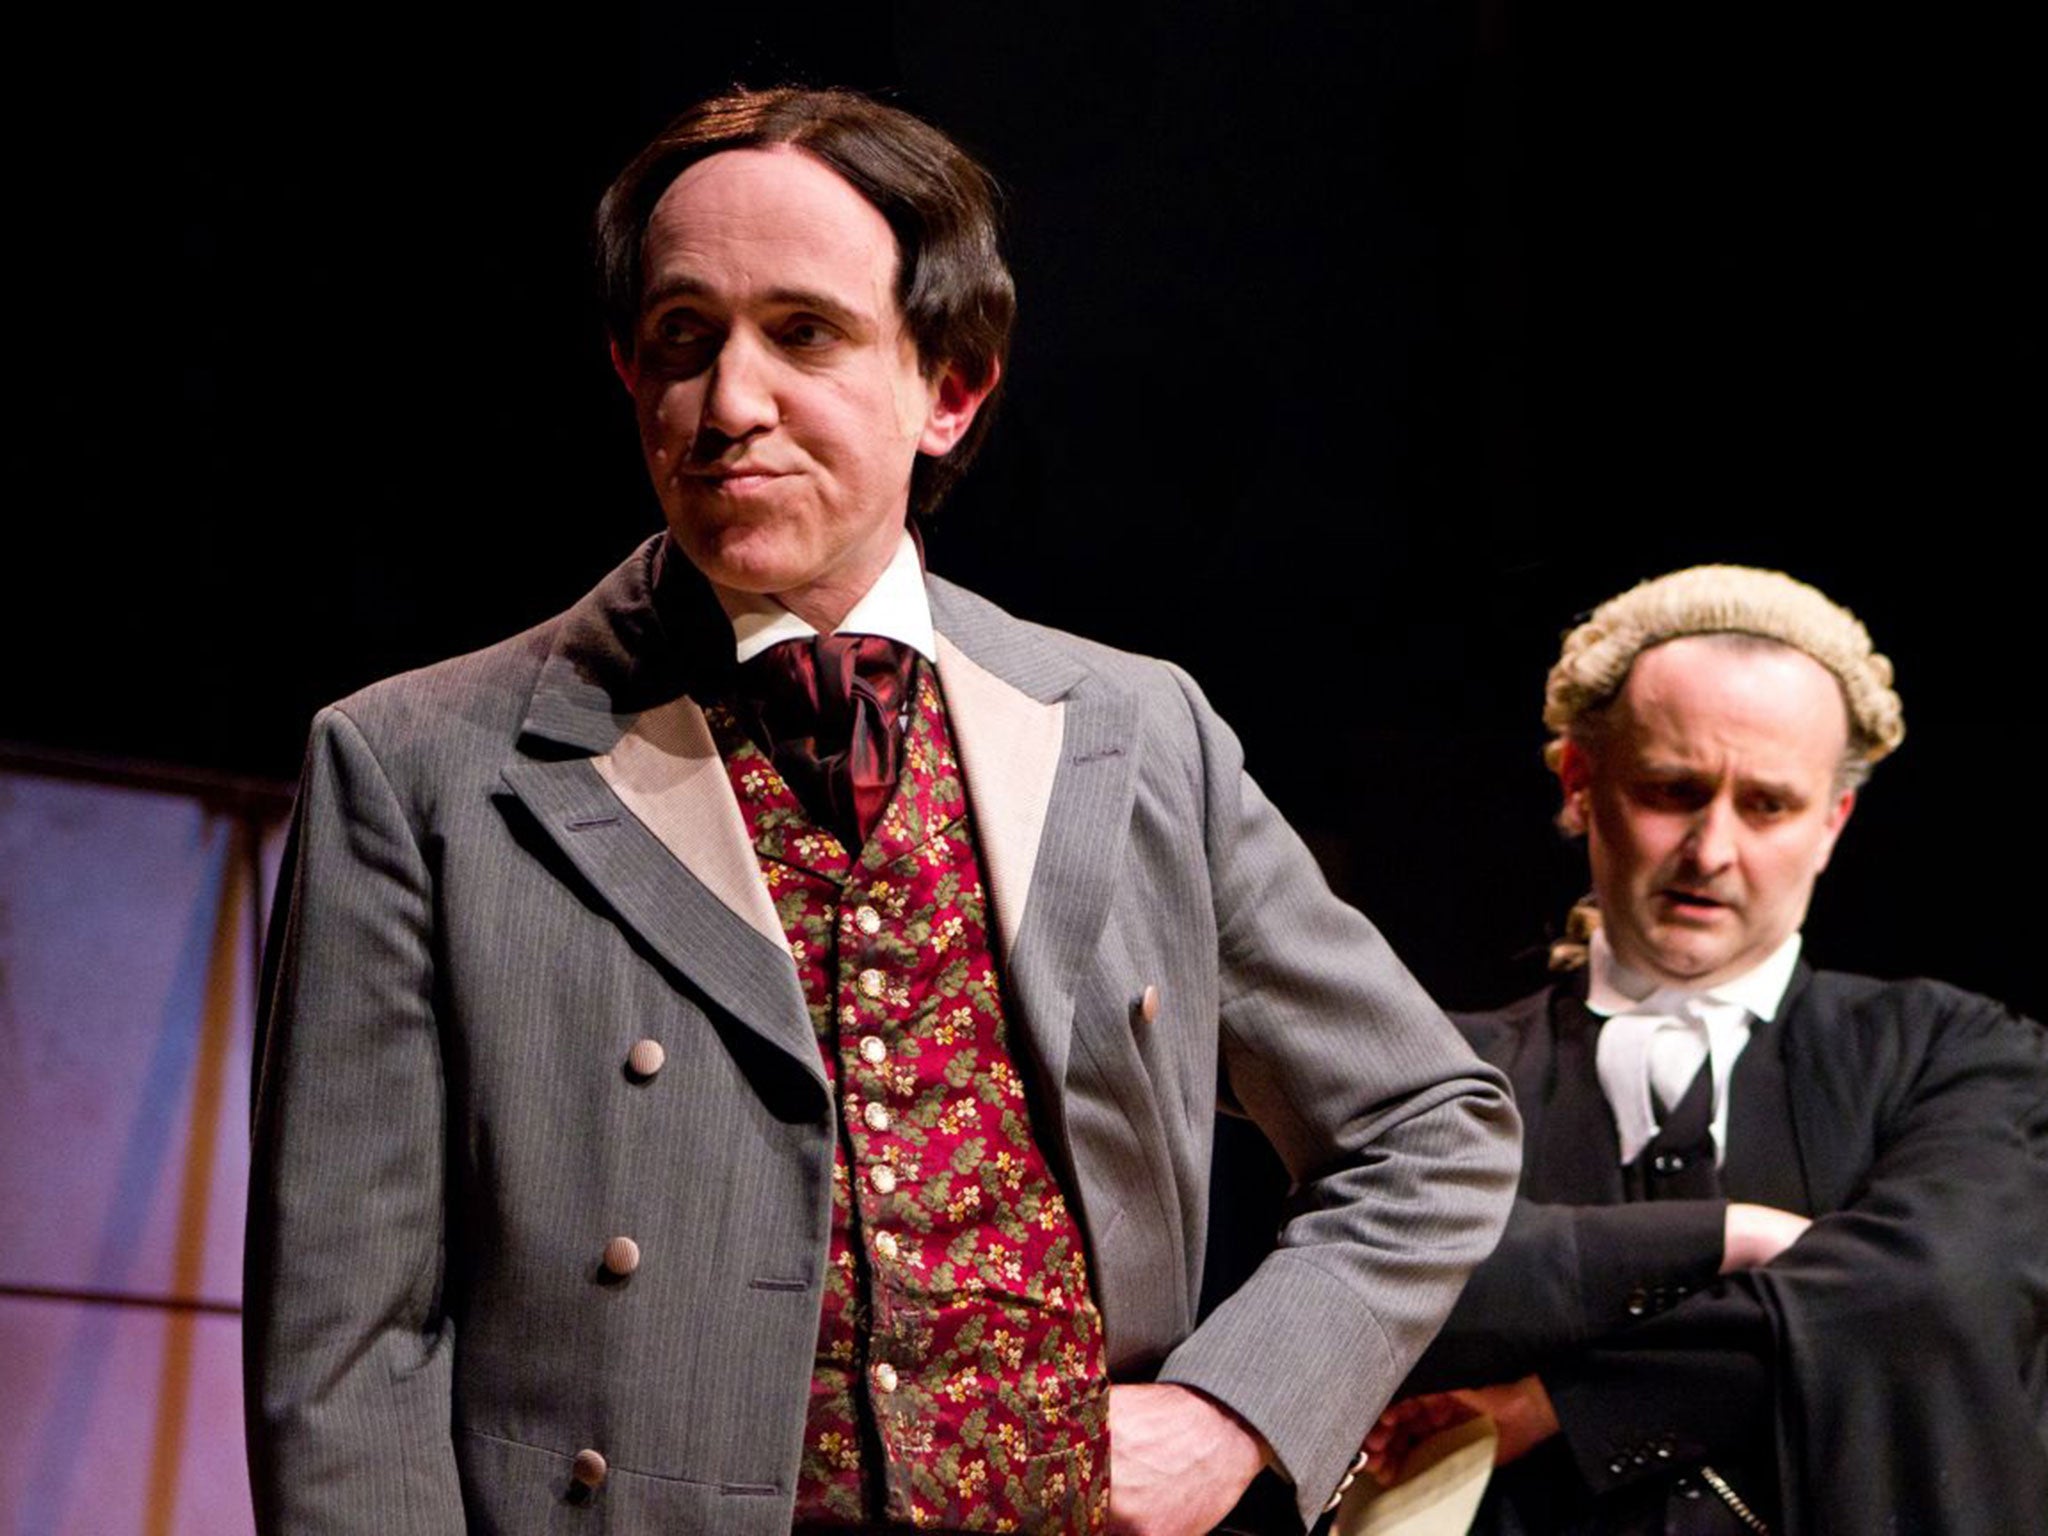 John Gorick as Wilde with William Kempsell in 'The Trials of Oscar Wilde'